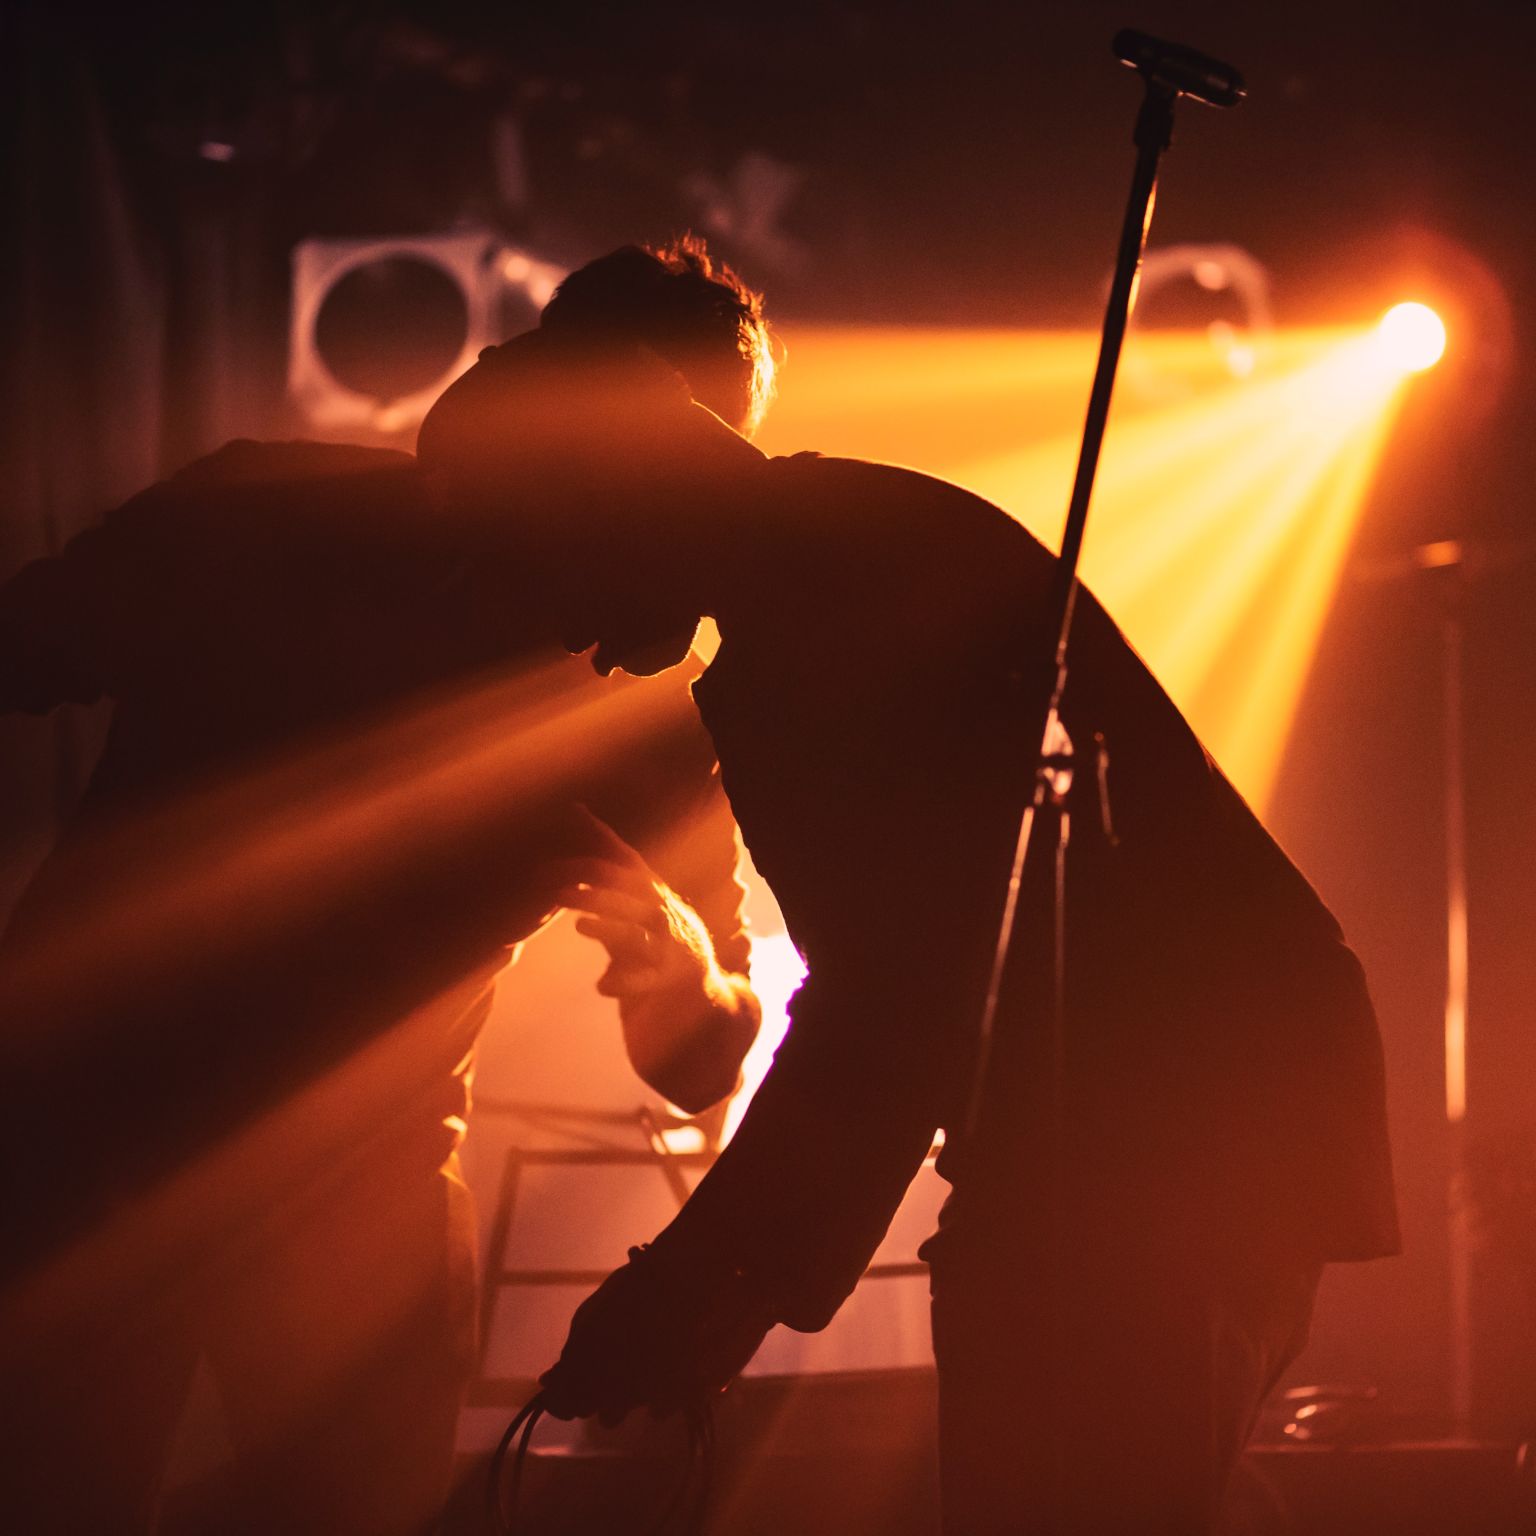 Musician setting up in low orange light with a mic in the foreground.